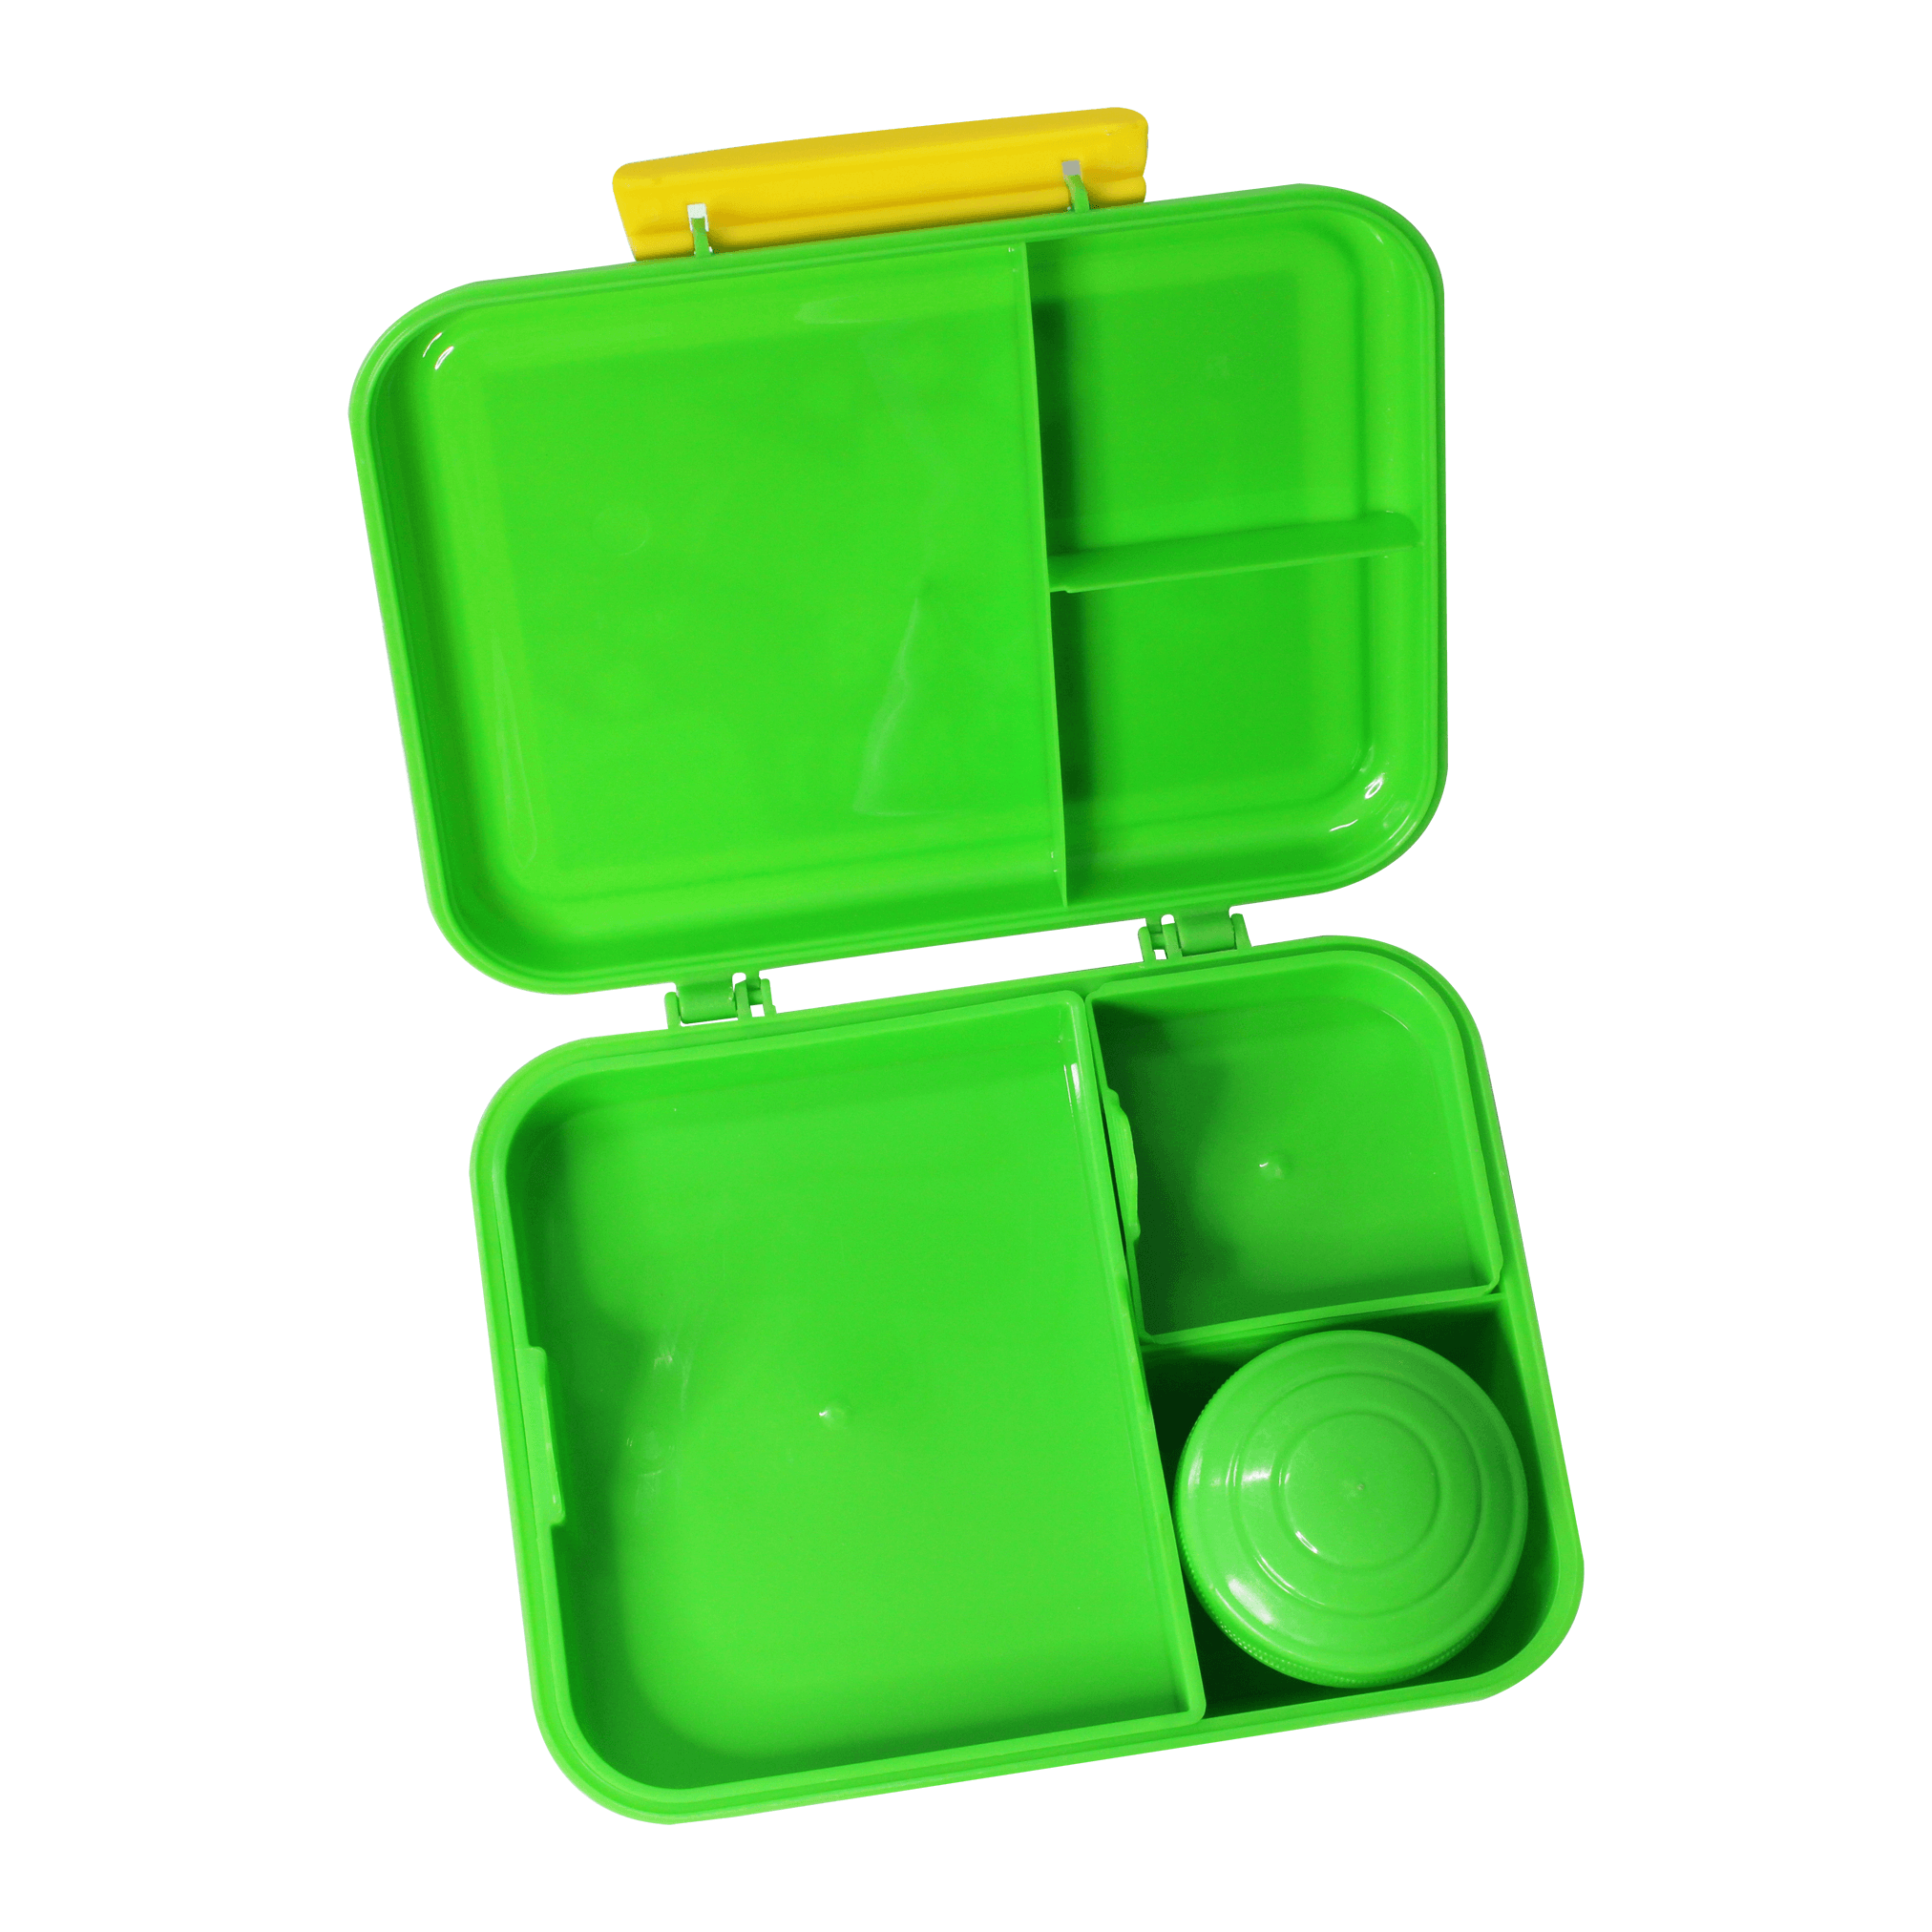 Nilco Lunch Box – Green - BumbleToys - 5-7 Years, Cecil, Girls, Pre-Order, School Supplies